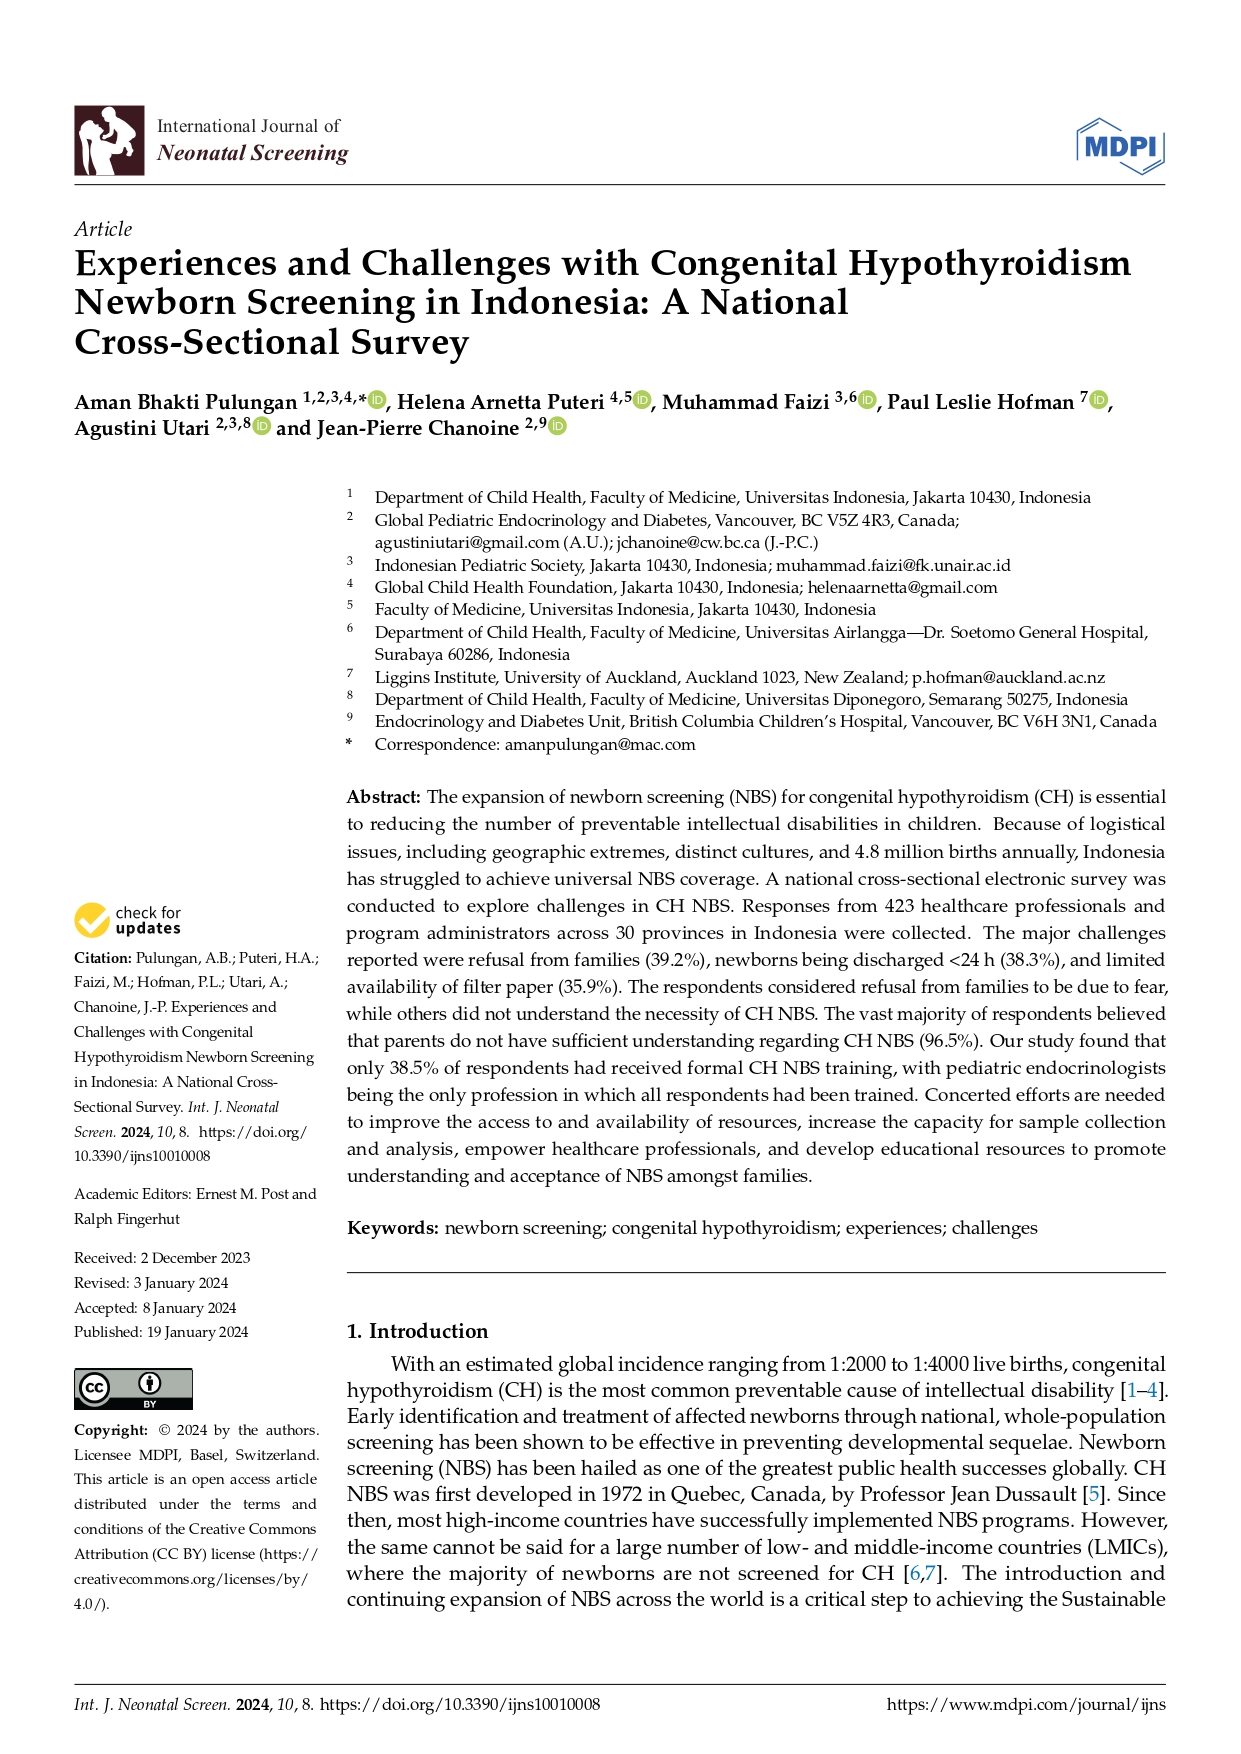 Experiences and Challenges with Congenital Hypothyroidism Newborn Screening in Indonesia: A National Cross-Sectional Survey